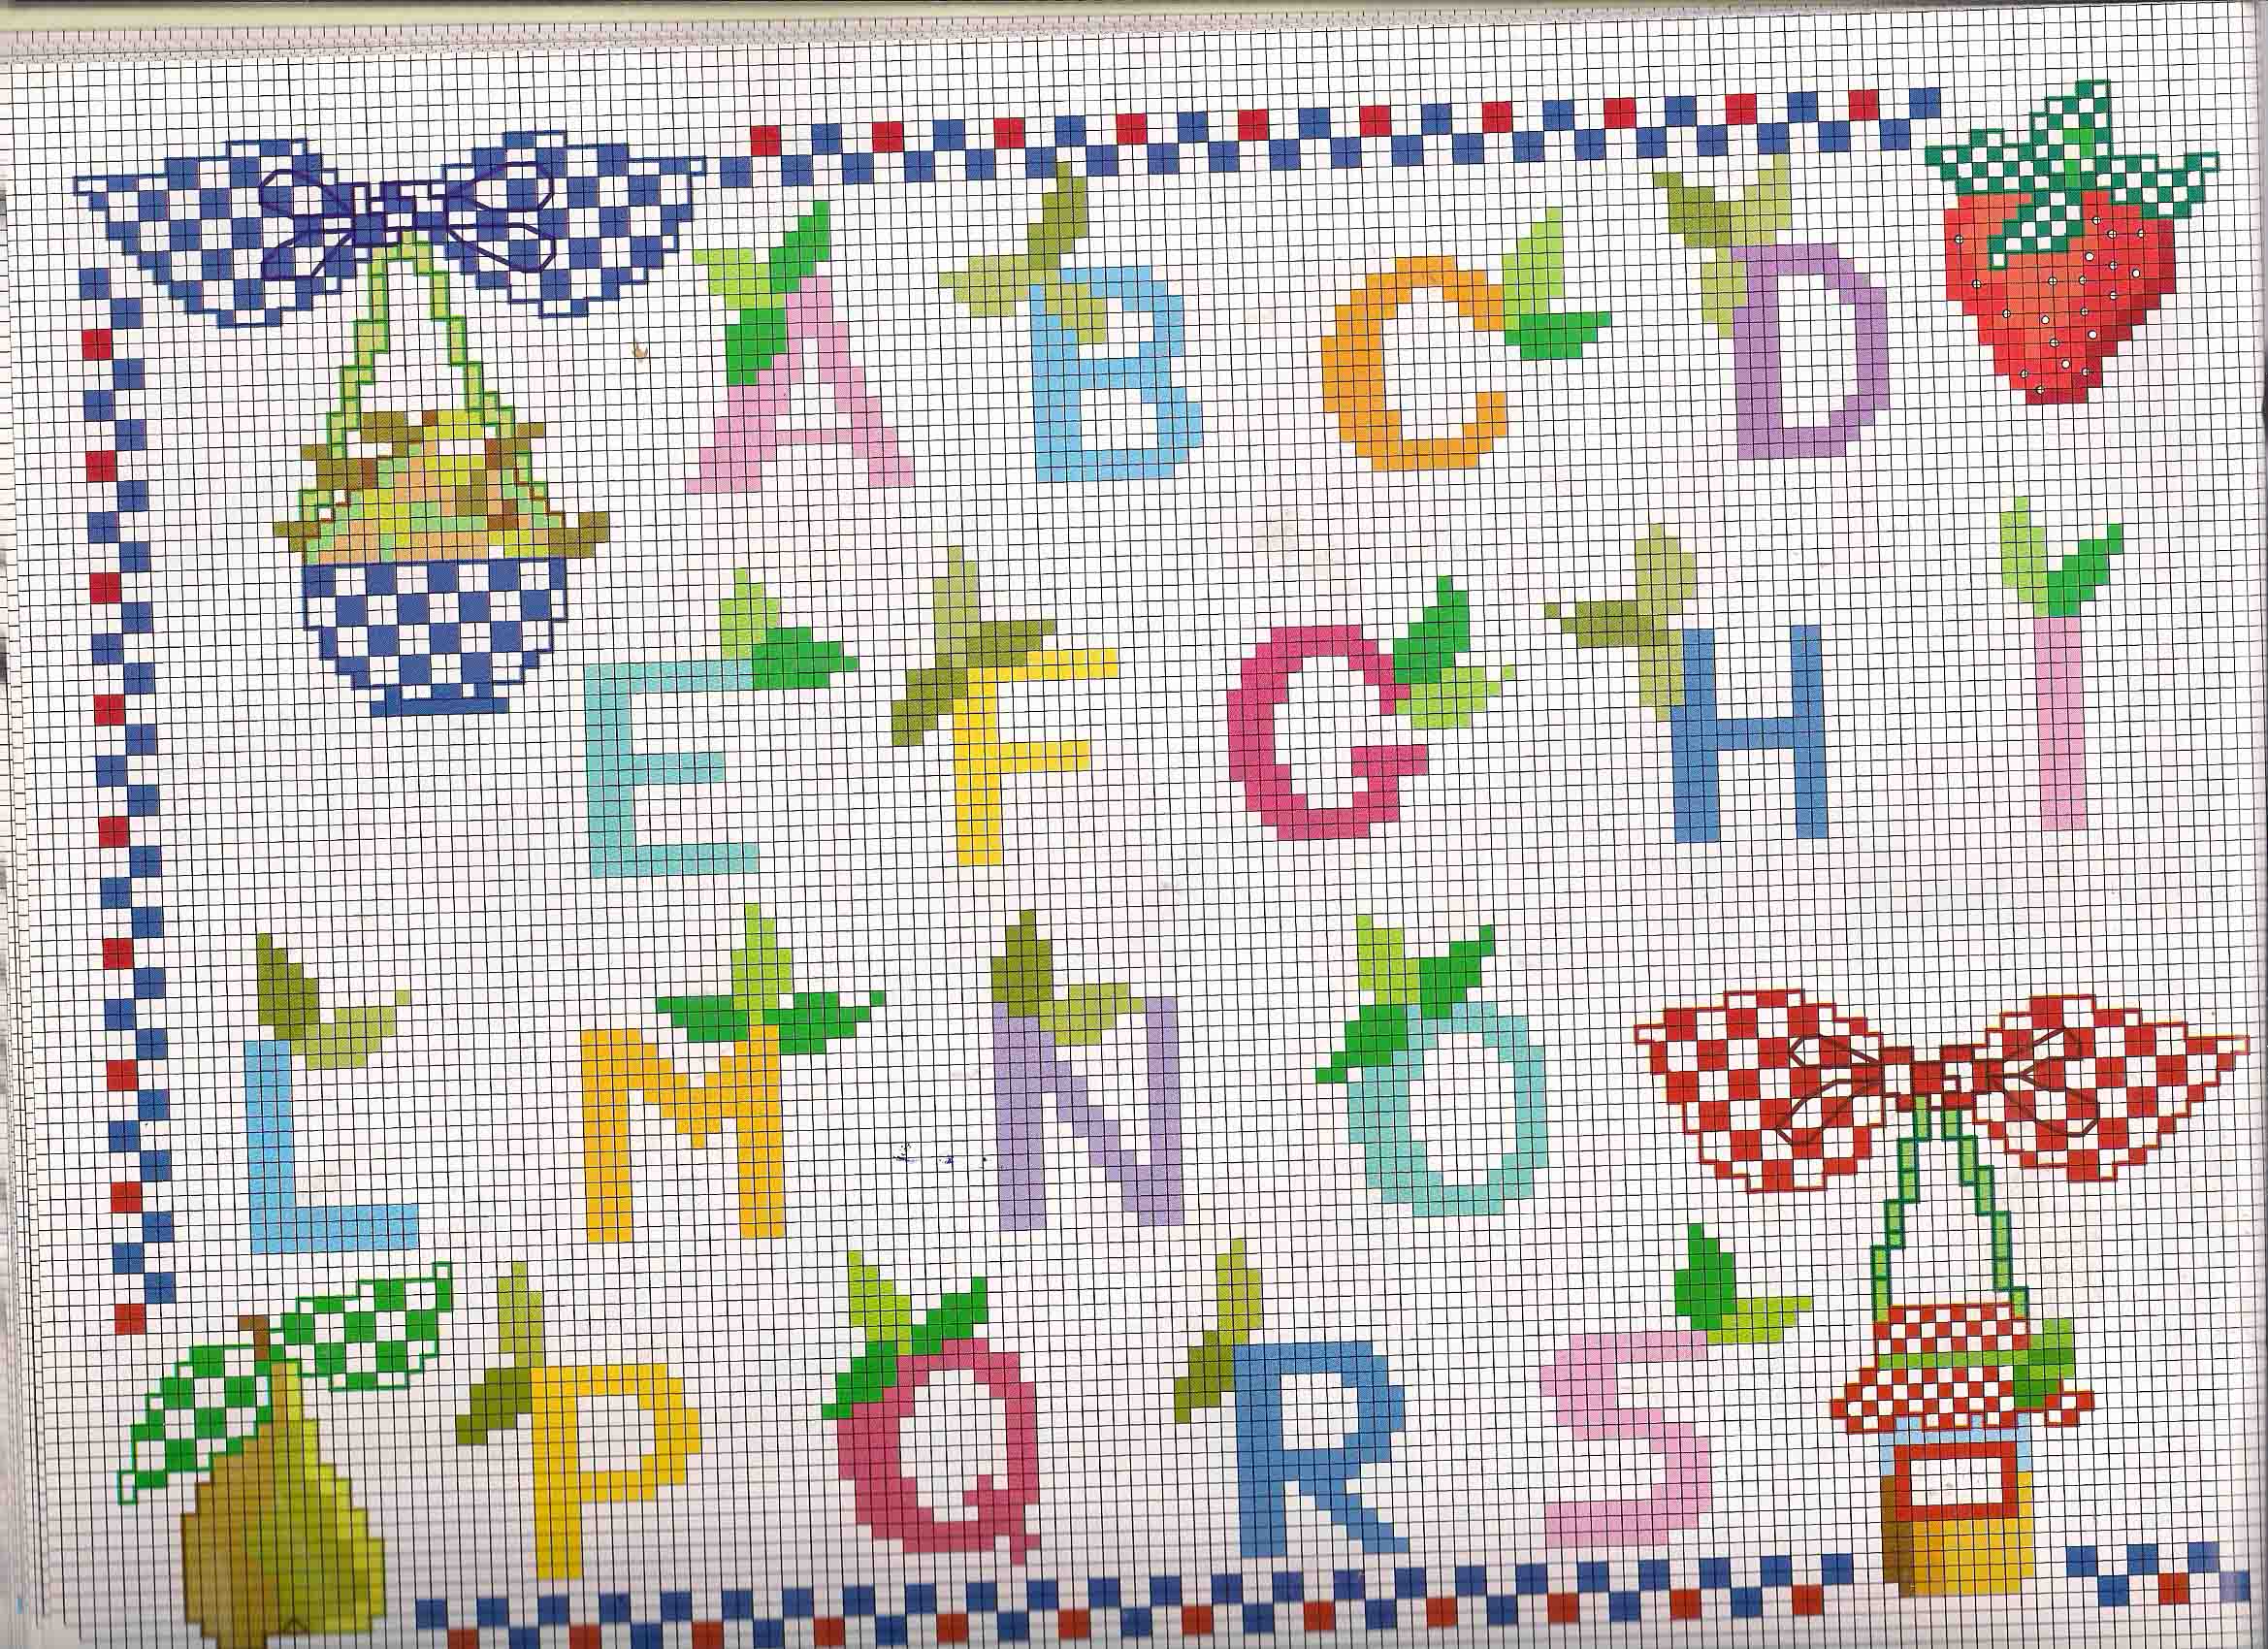 Cross stitch alphabet with fruit leaves and marmalade (1)